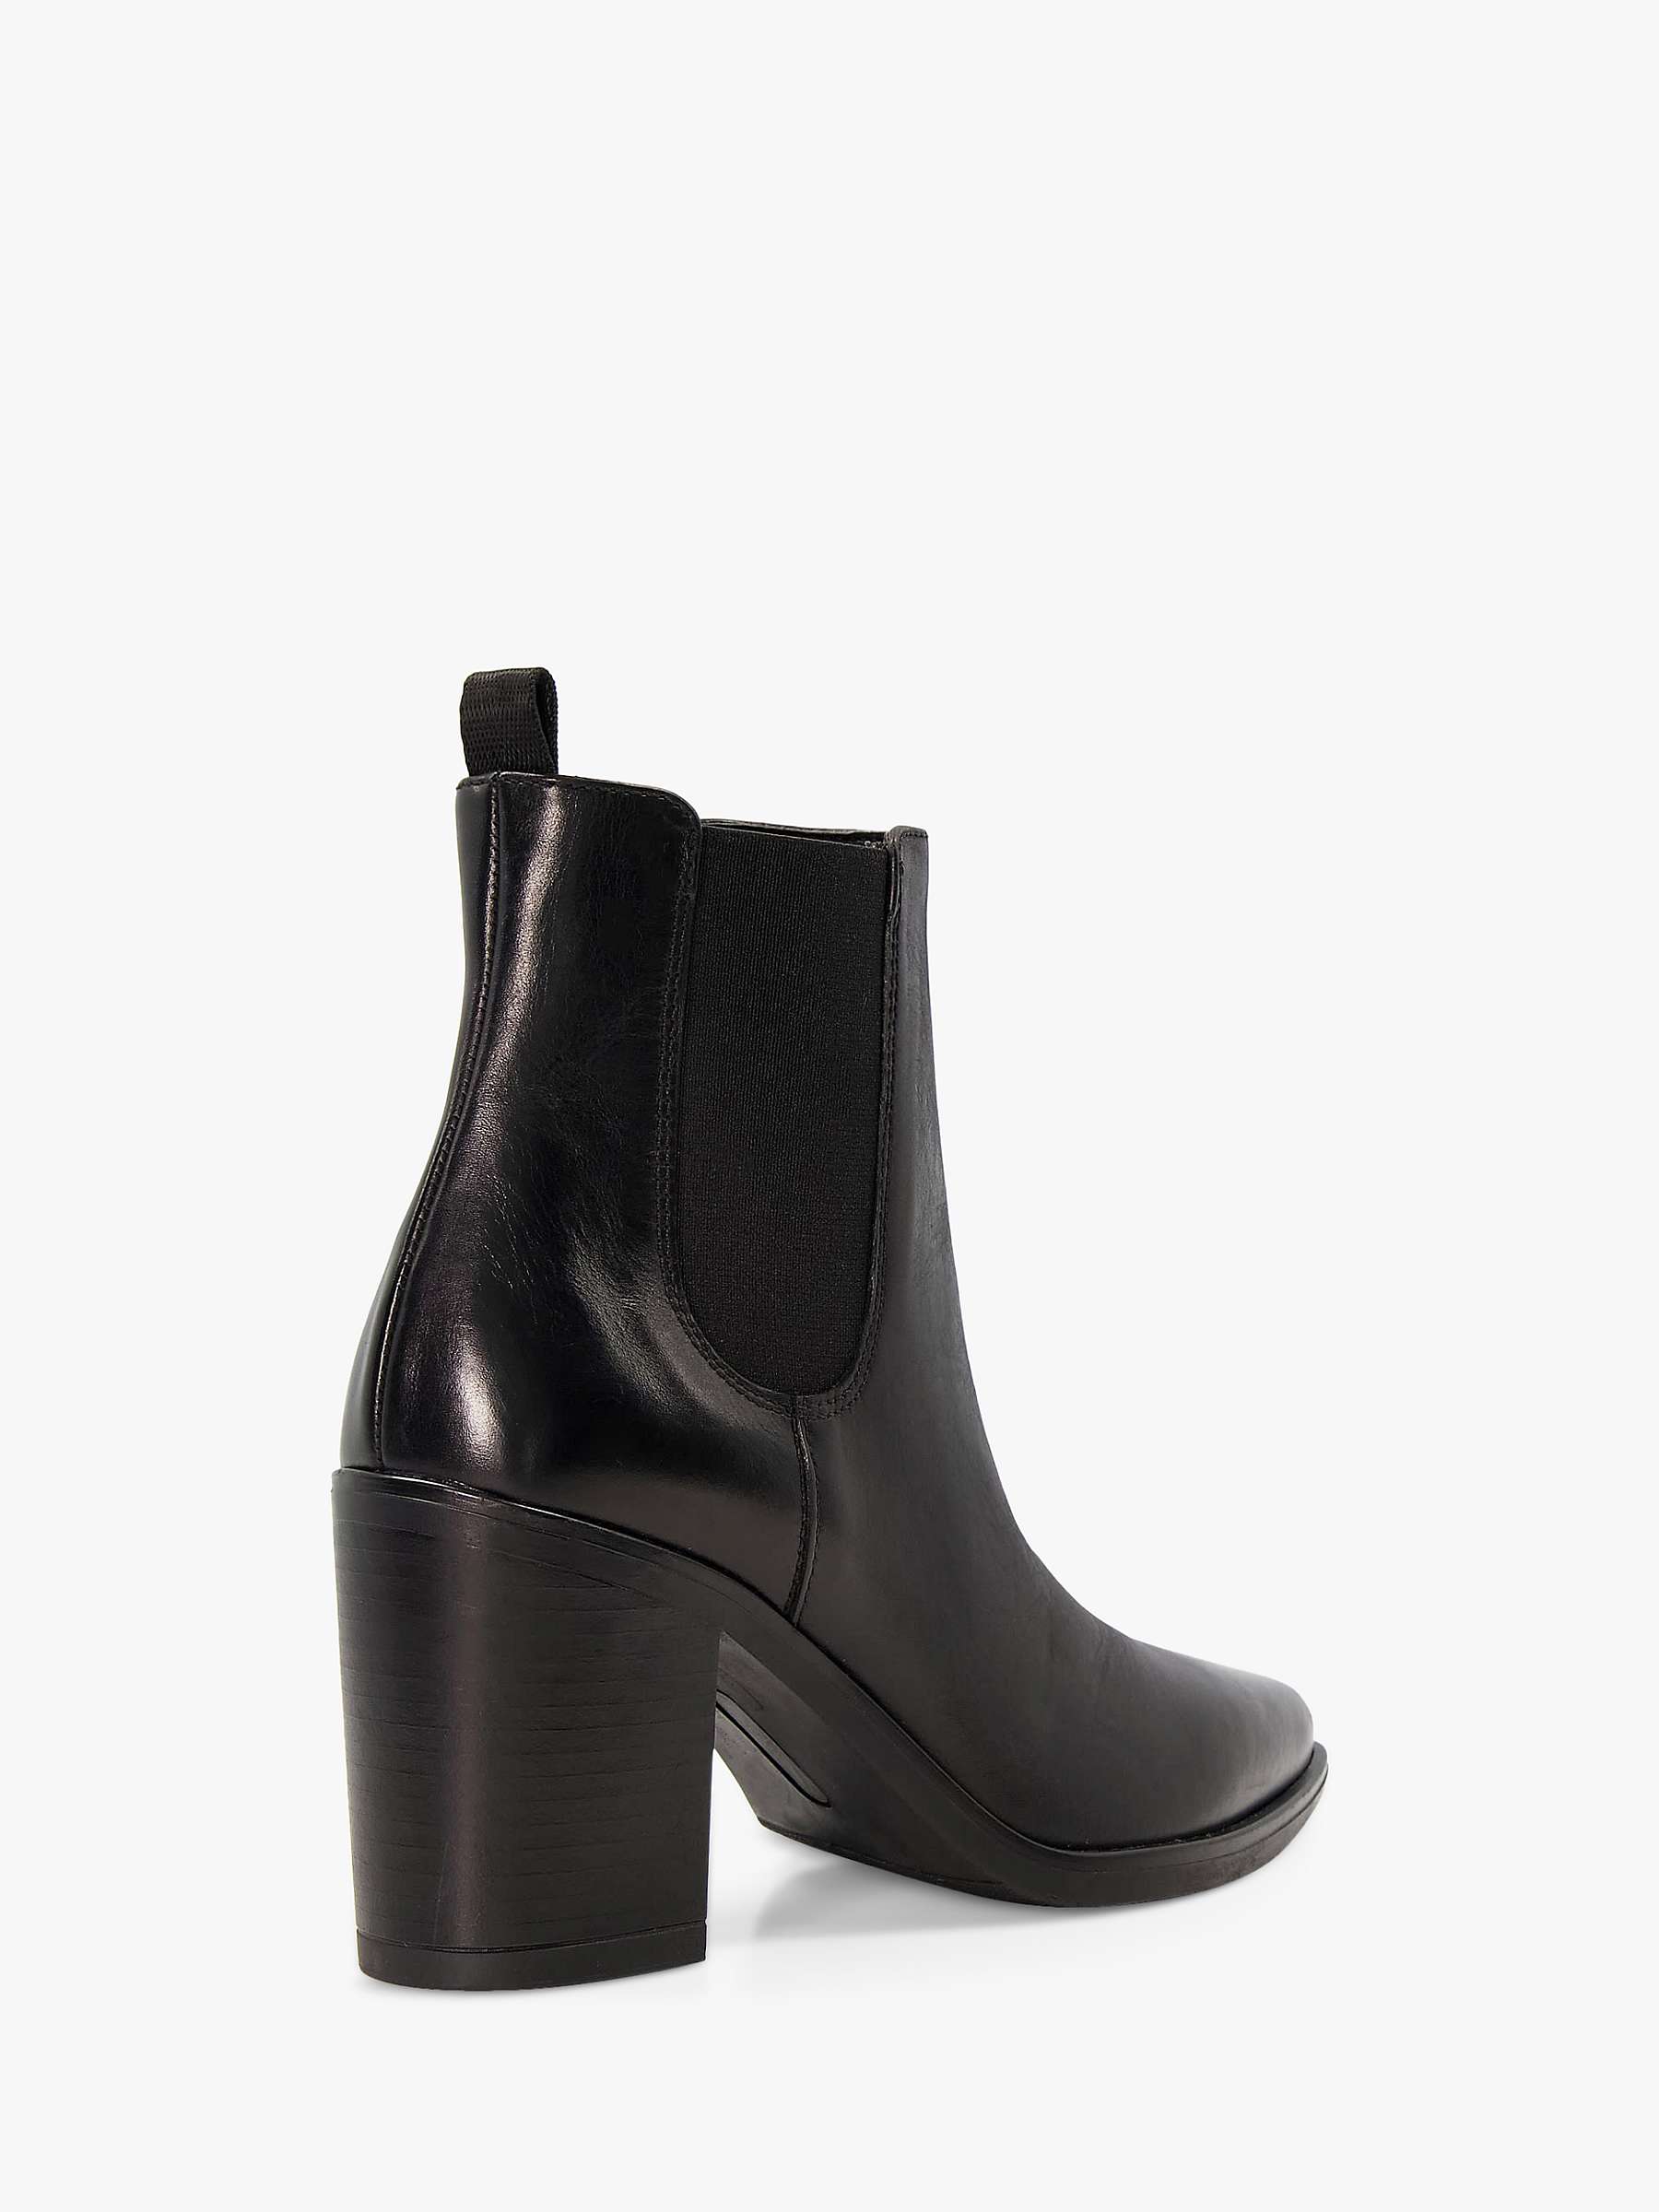 Dune Prea Leather Block Heel Ankle Boots, Black at John Lewis & Partners